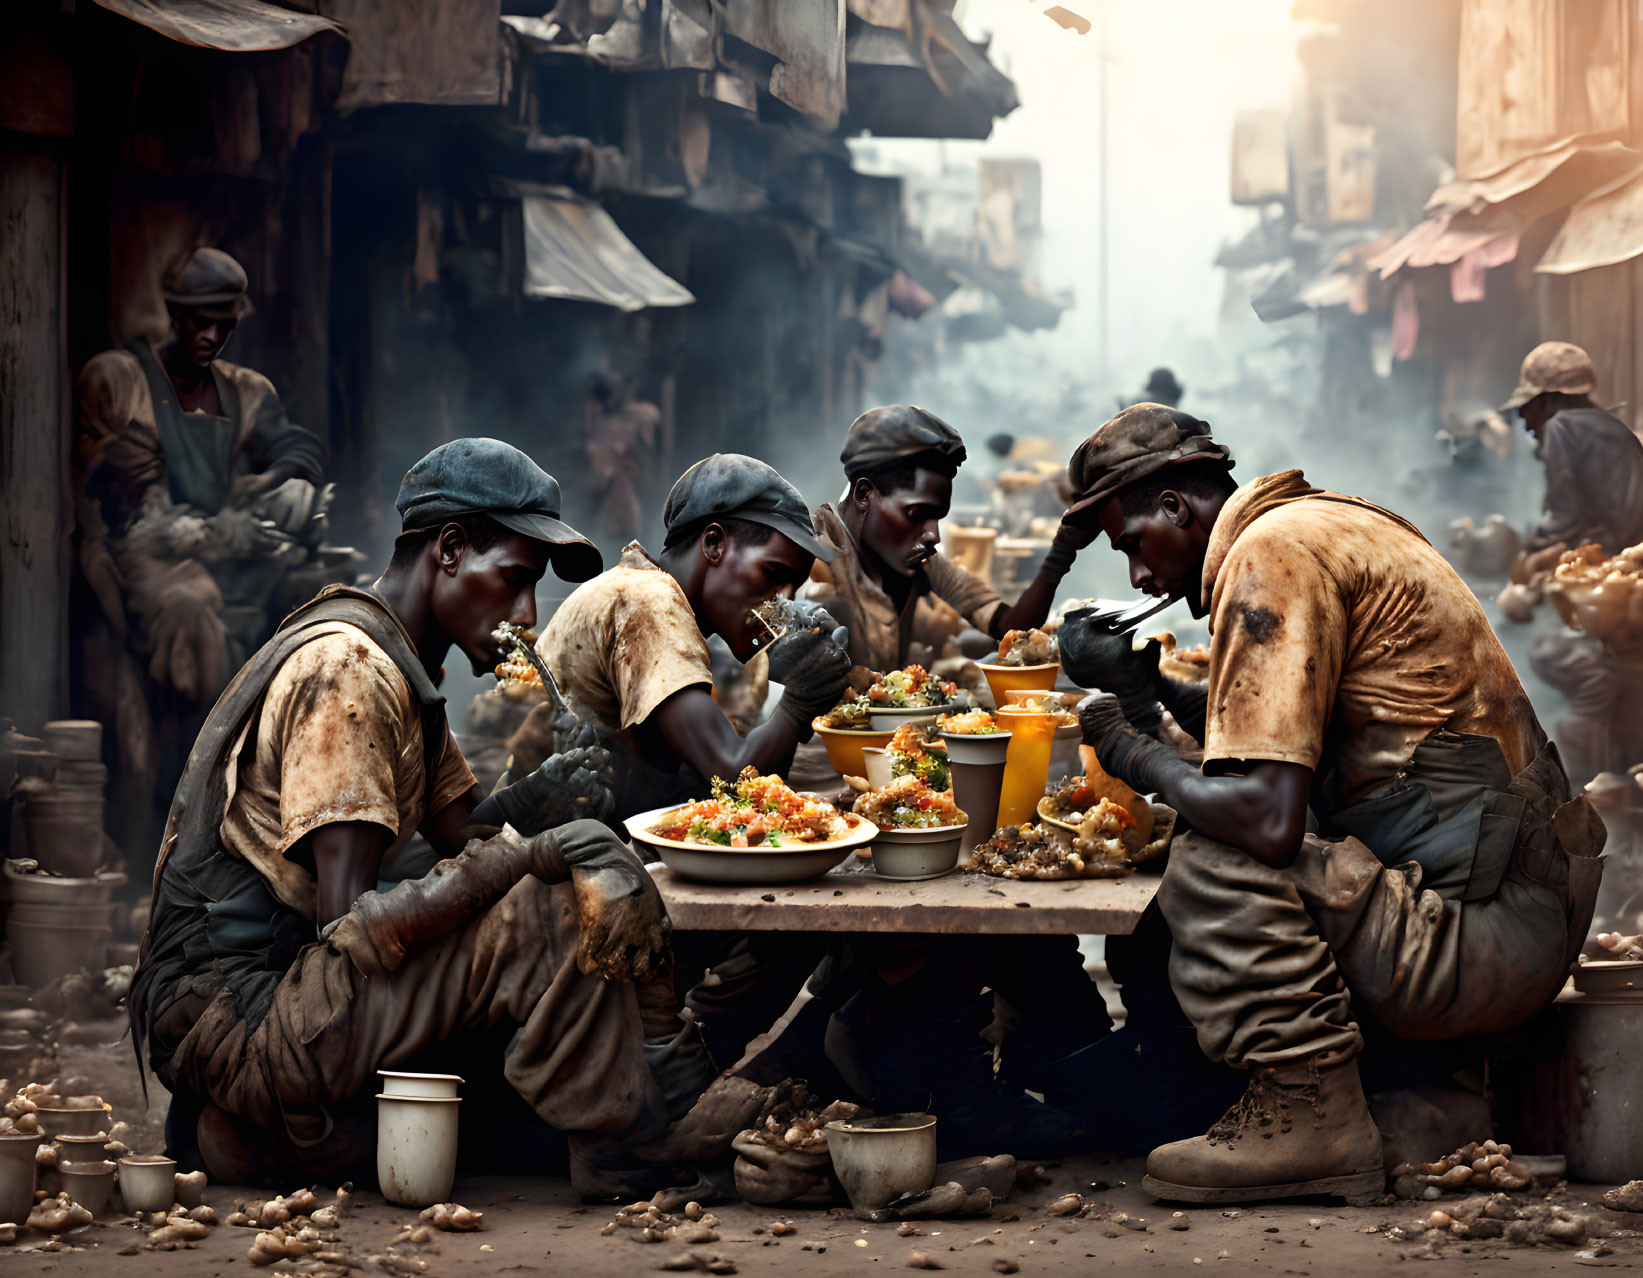 Five workers eating meal at makeshift table in dirty overalls and caps amid smoky, dusky setting